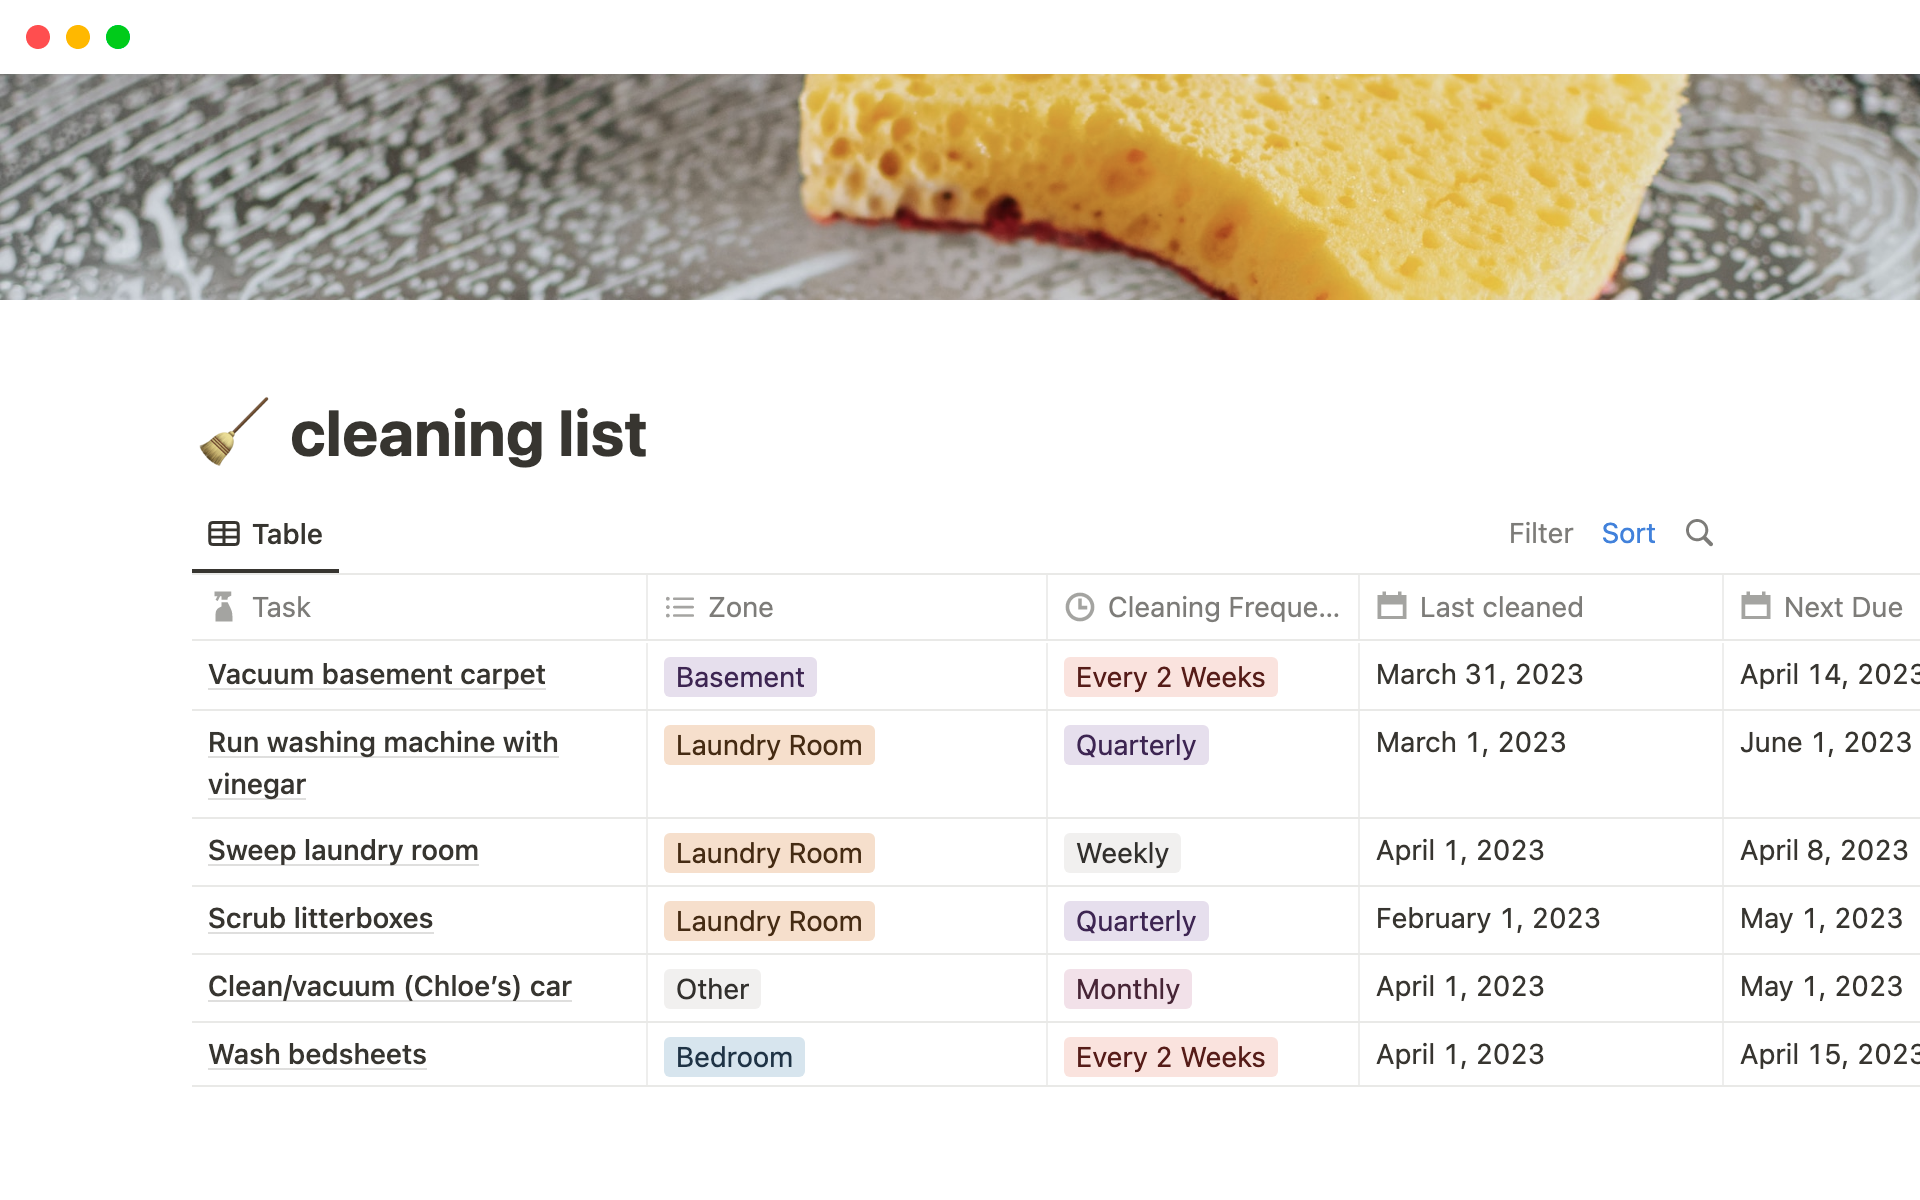 This template allows the user to keep track of household chores and gives "due dates" based on specified cleaning frequency.